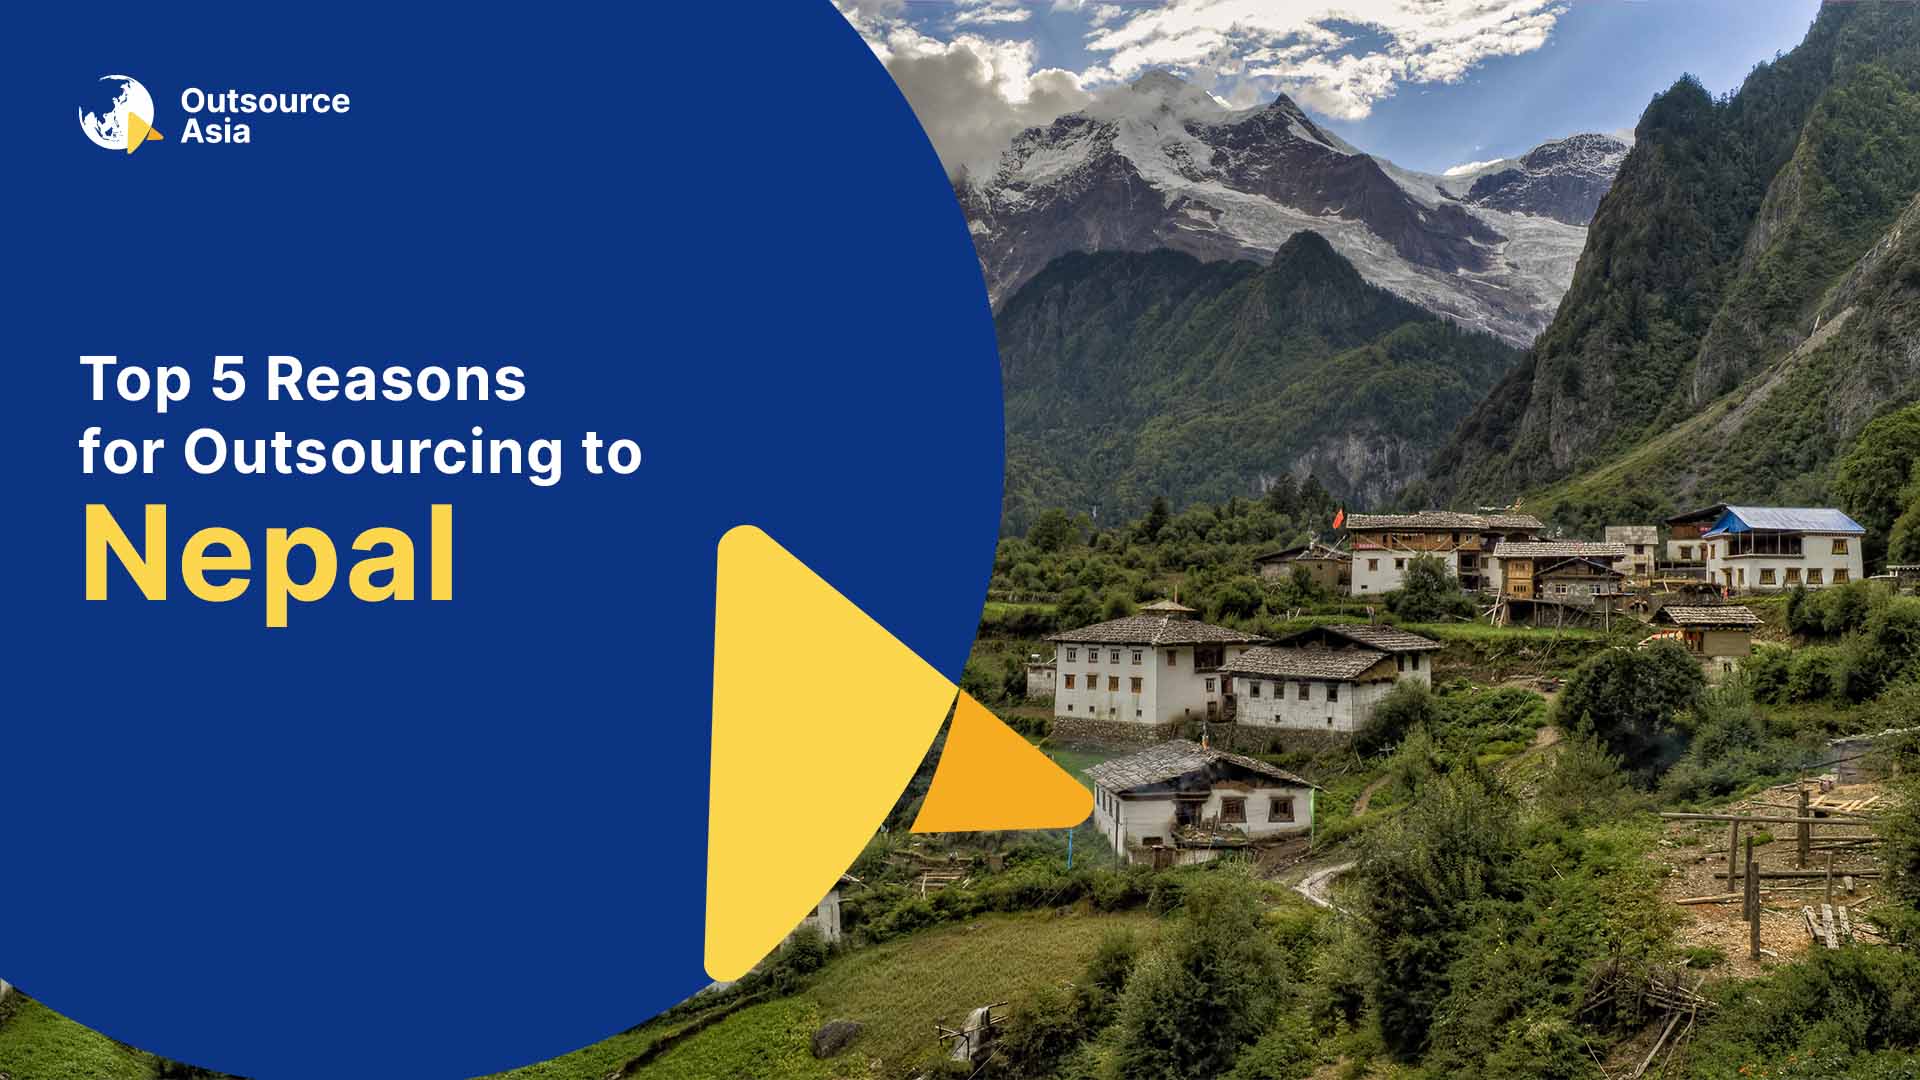 Top 5 Reasons for Outsourcing to Nepal